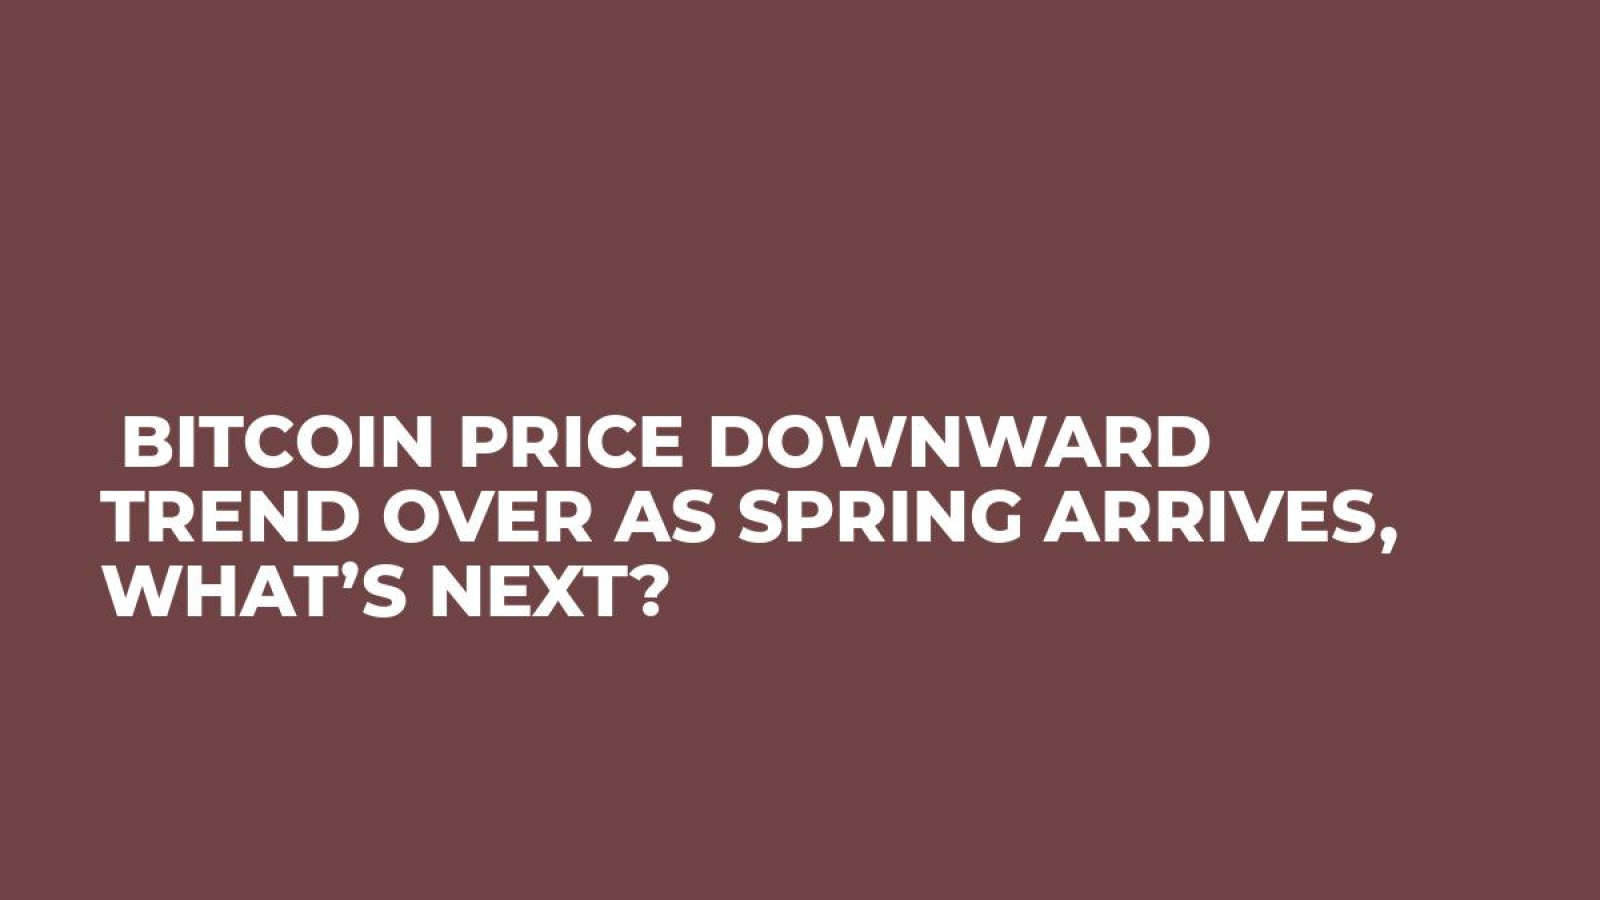  Bitcoin Price Downward Trend Over As Spring Arrives, What’s Next?